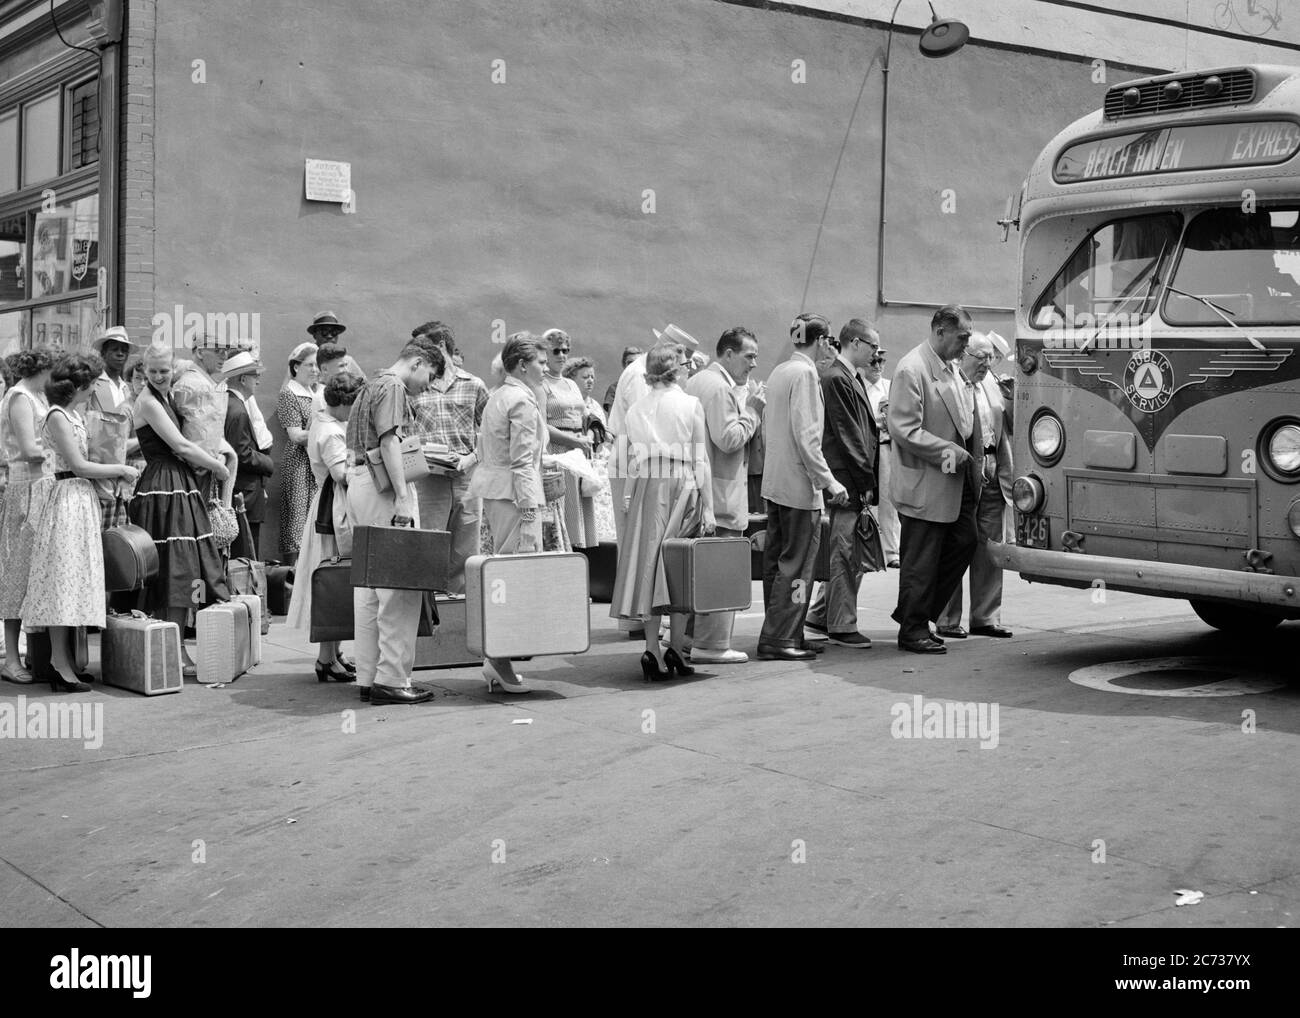 1950s VACATIONERS BOARDING NEW JERSEY TRANSIT BUS TERMINAL 13TH & FILBERT STREETS PHILADELPHIA PENNSYLVANIA USA - c504 HAR001 HARS FULL-LENGTH LADIES PERSONS UNITED STATES OF AMERICA MALES TRANSPORTATION B&W NORTH AMERICA SUMMERTIME NORTH AMERICAN TIME OFF DREAMS ADVENTURE STREETS MOTOR VEHICLE TRIP GETAWAY EXCITEMENT EXTERIOR PA RECREATION OPPORTUNITY HOLIDAYS NJ COMMONWEALTH CONNECTION CONCEPTUAL KEYSTONE STATE STYLISH 13TH BEACH HAVEN BUSES COOPERATION DESTINATION SEASON TERMINAL TOGETHERNESS TRANSIT VACATIONS & BLACK AND WHITE CAUCASIAN ETHNICITY CITY OF BROTHERLY LOVE HAR001 Stock Photo